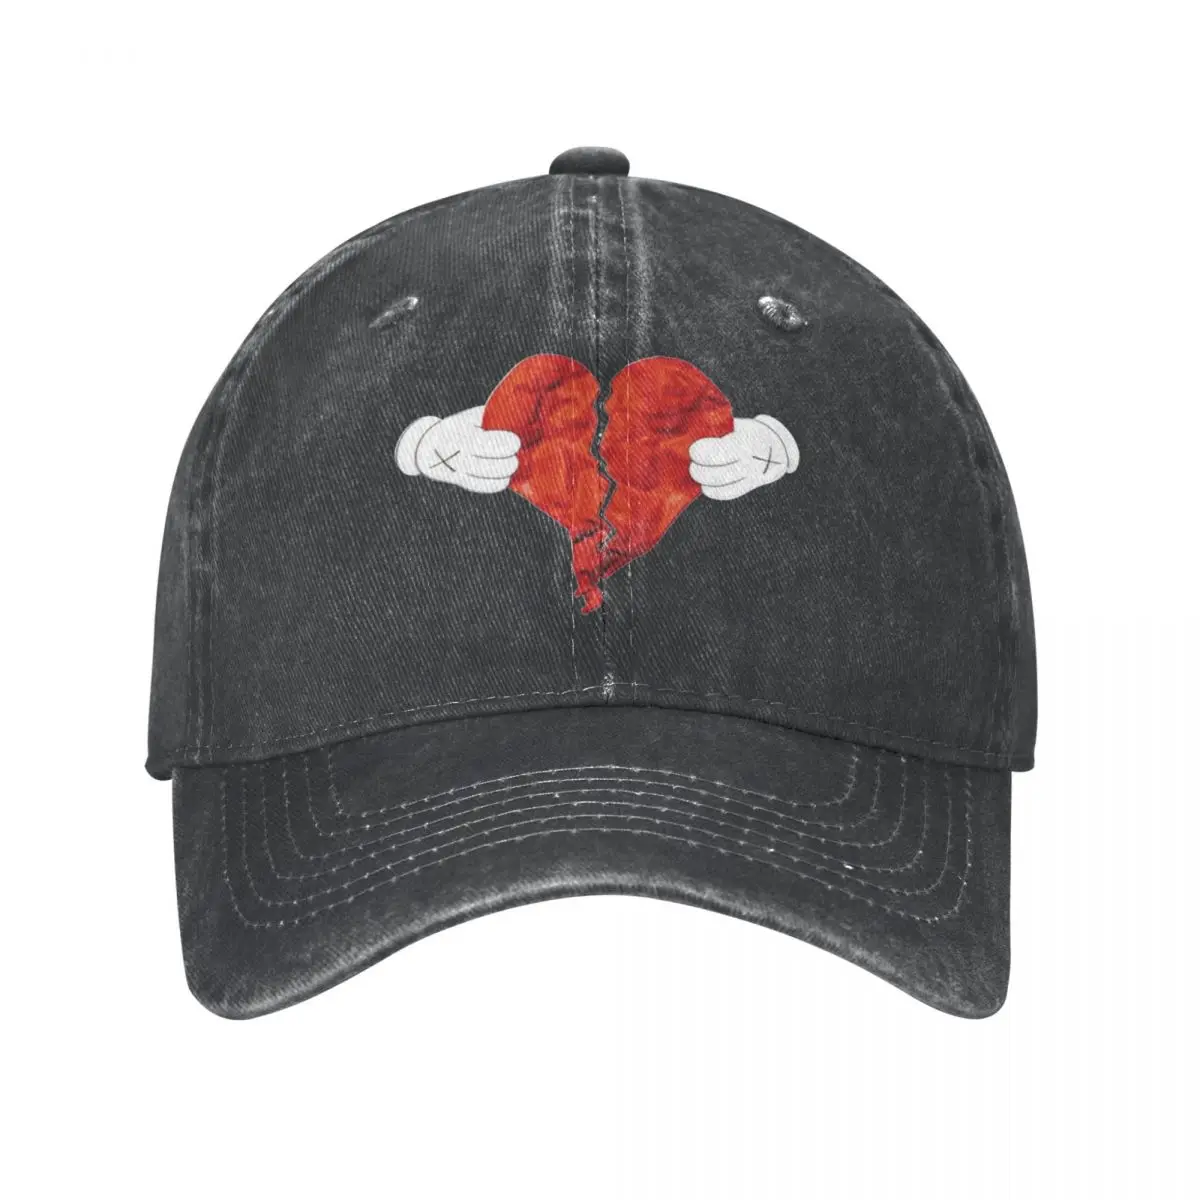 

Kanye West 808s Heartbreak Heart Baseball Caps Casual Distressed Washed Snapback Hat for Men Women Outdoor Workouts Caps Hat